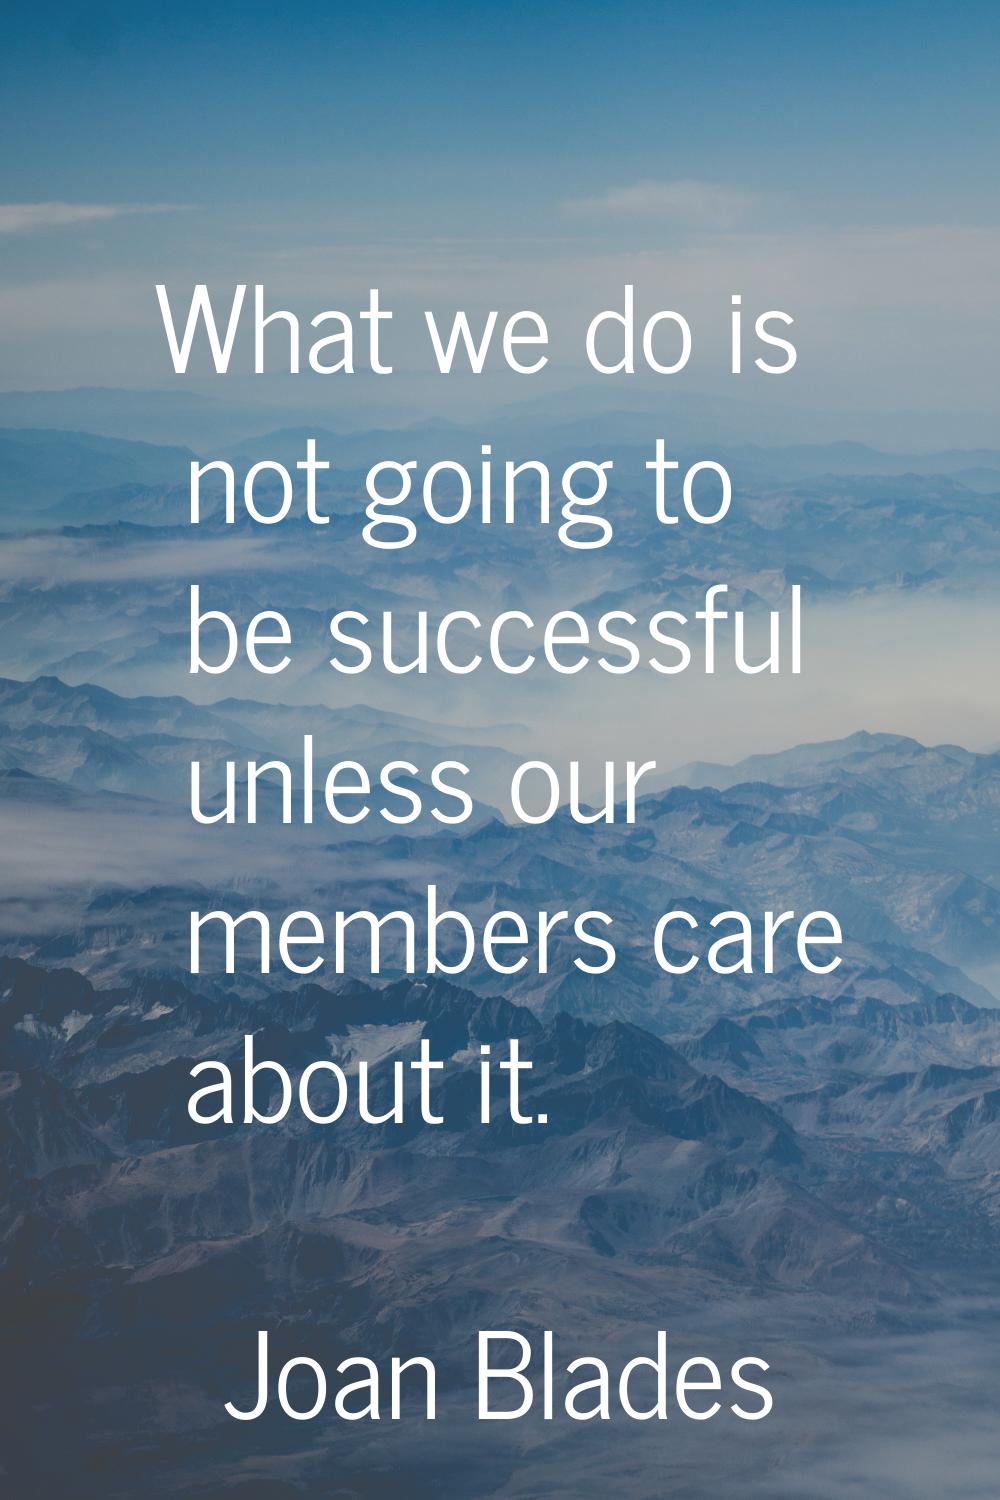 What we do is not going to be successful unless our members care about it.